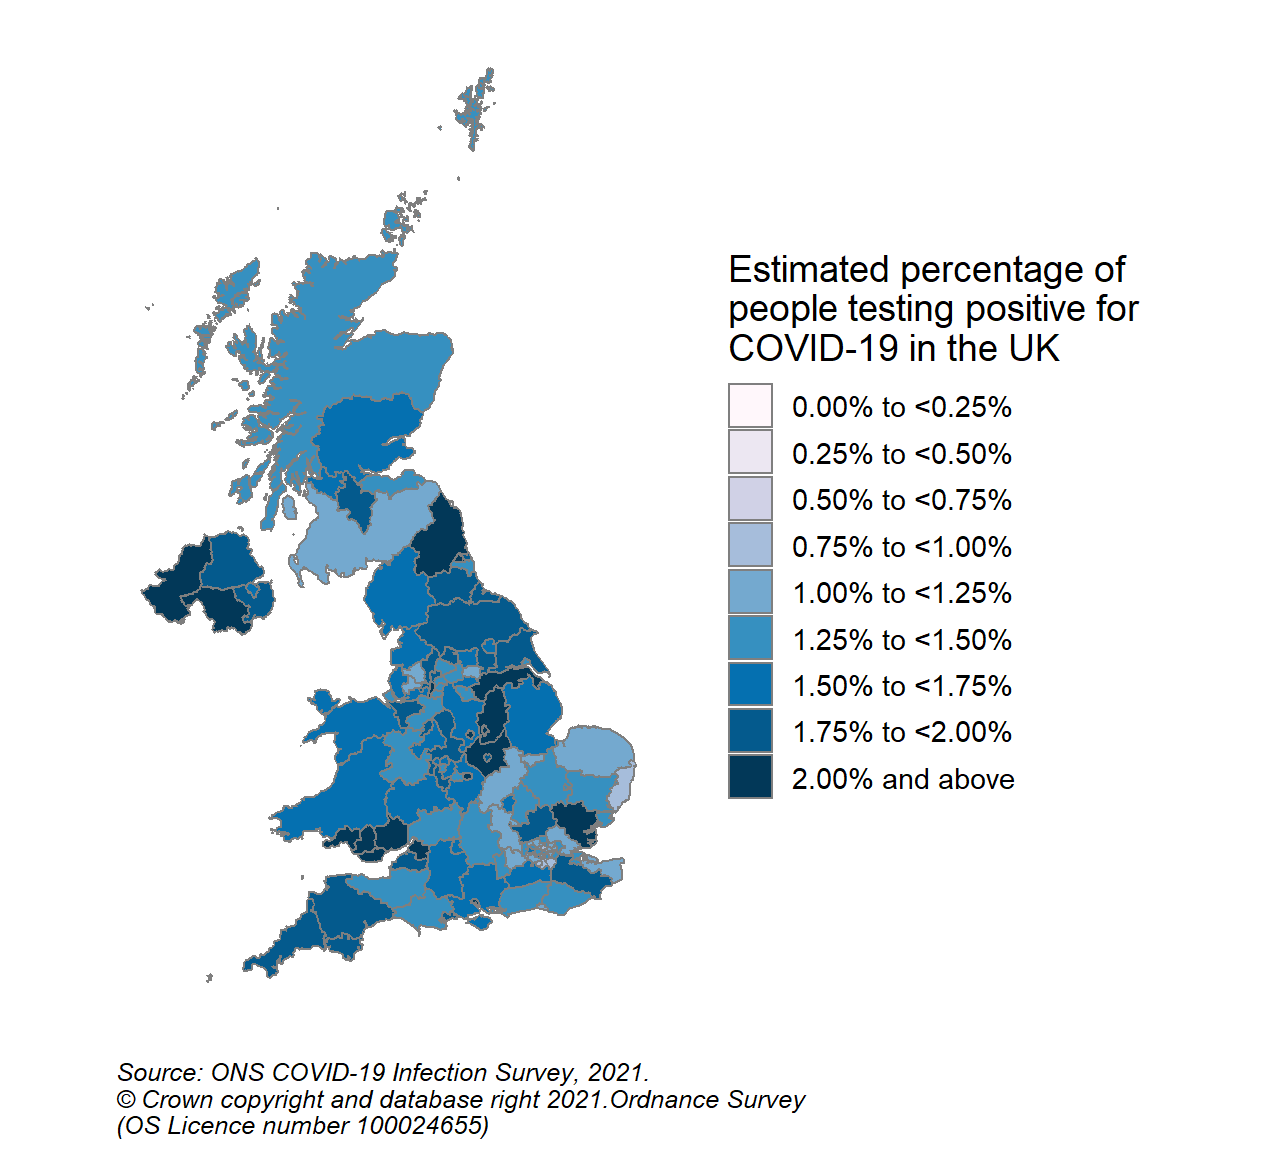 This colour coded map of the UK shows the modelled estimates of the percentage of the private residential population testing positive for COVID-19, by COVID-19 Infection Survey sub-regions. In Scotland, these sub-regions are comprised of Health Boards. The regions are: 123 - NHS Grampian, NHS Highland, NHS Orkney, NHS Shetland and NHS Western Isles, 124 - NHS Fife, NHS Forth Valley and NHS Tayside, 125 - NHS Greater Glasgow & Clyde, 126 - NHS Lothian, 127 - NHS Lanarkshire, 128 - NHS Ayrshire & Arran, NHS Borders and NHS Dumfries & Galloway.  The sub-region with the highest modelled estimate for the percentage of people testing positive was CIS Region 127 (NHS Lanarkshire) at 1.83% (95% credible interval: 1.46% to 2.30%).  The sub-region with the lowest modelled estimate was Region 128 (NHS Ayrshire & Arran, NHS Borders and NHS Dumfries & Galloway), at 1.16% (95% credible interval: 0.90% to 1.48%).